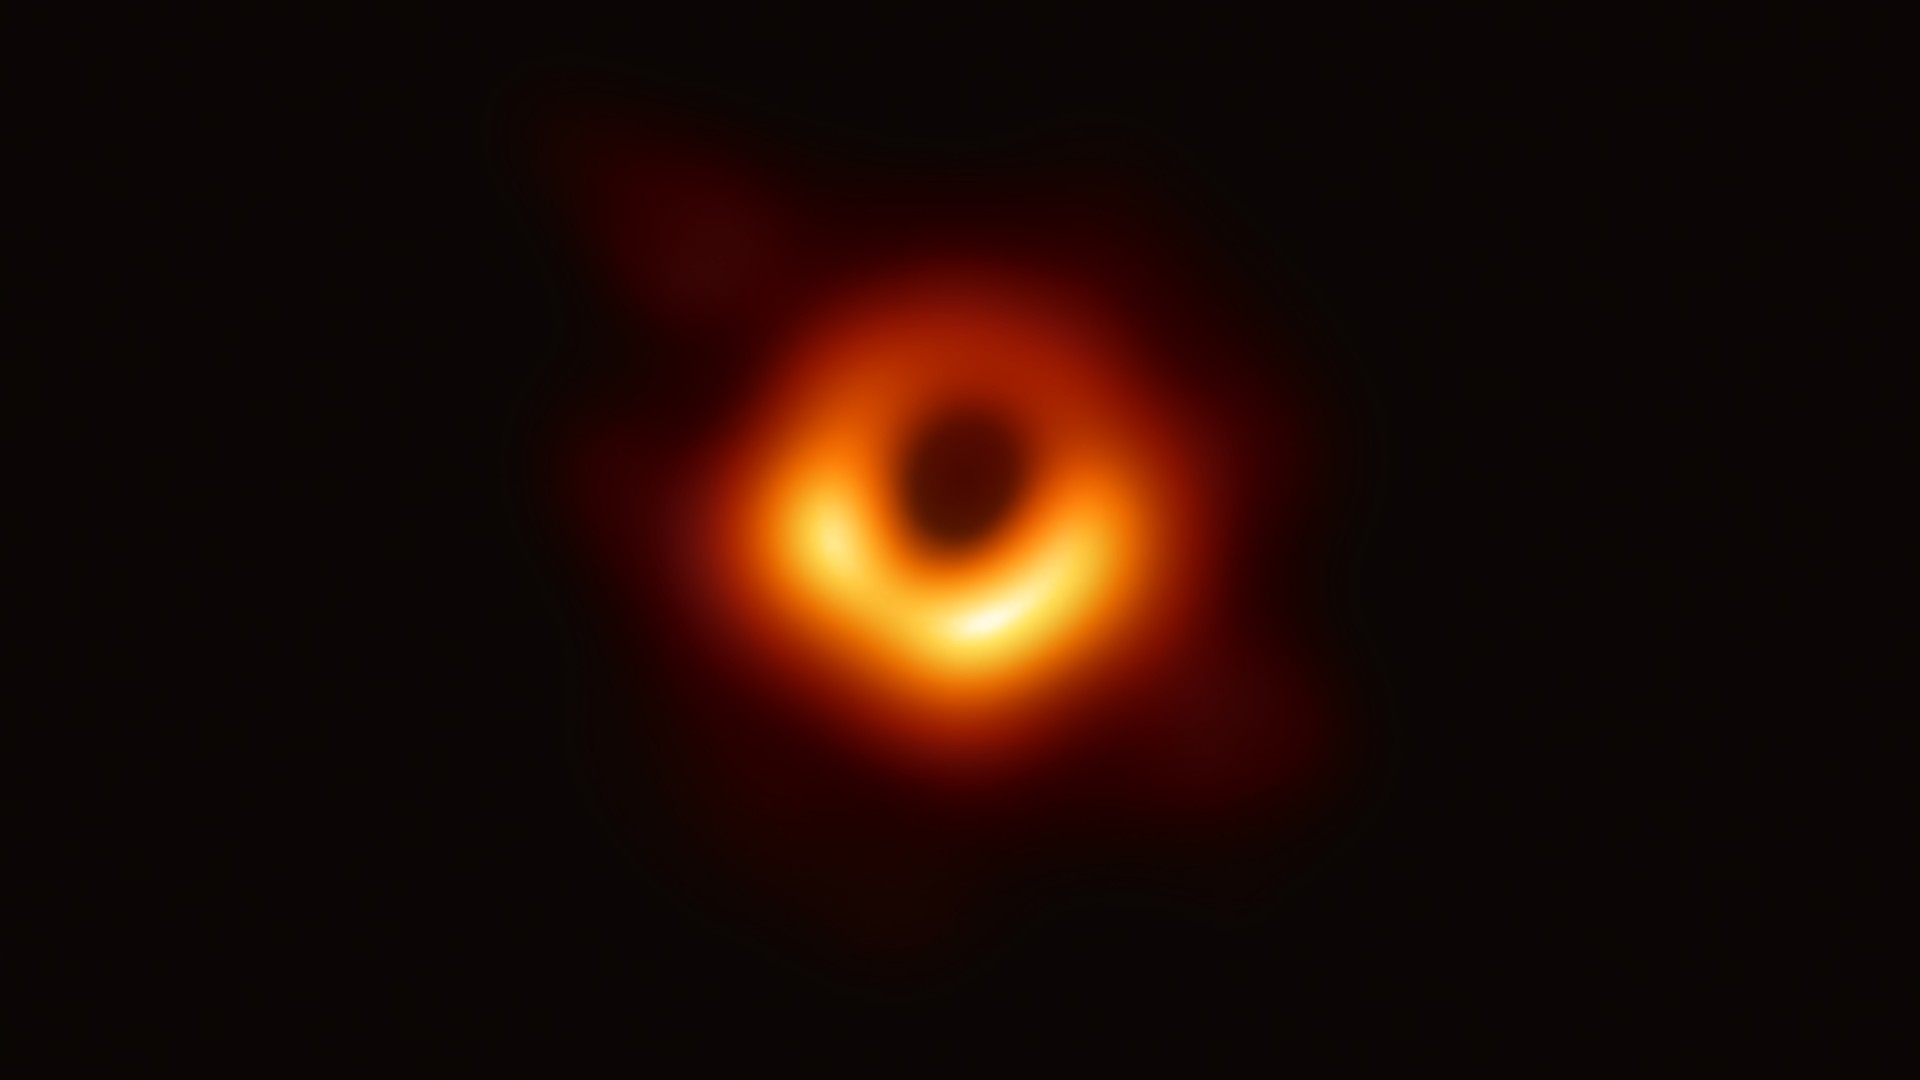 Image of black hole looks like a bright orange glowing ring with dark patch in the center.